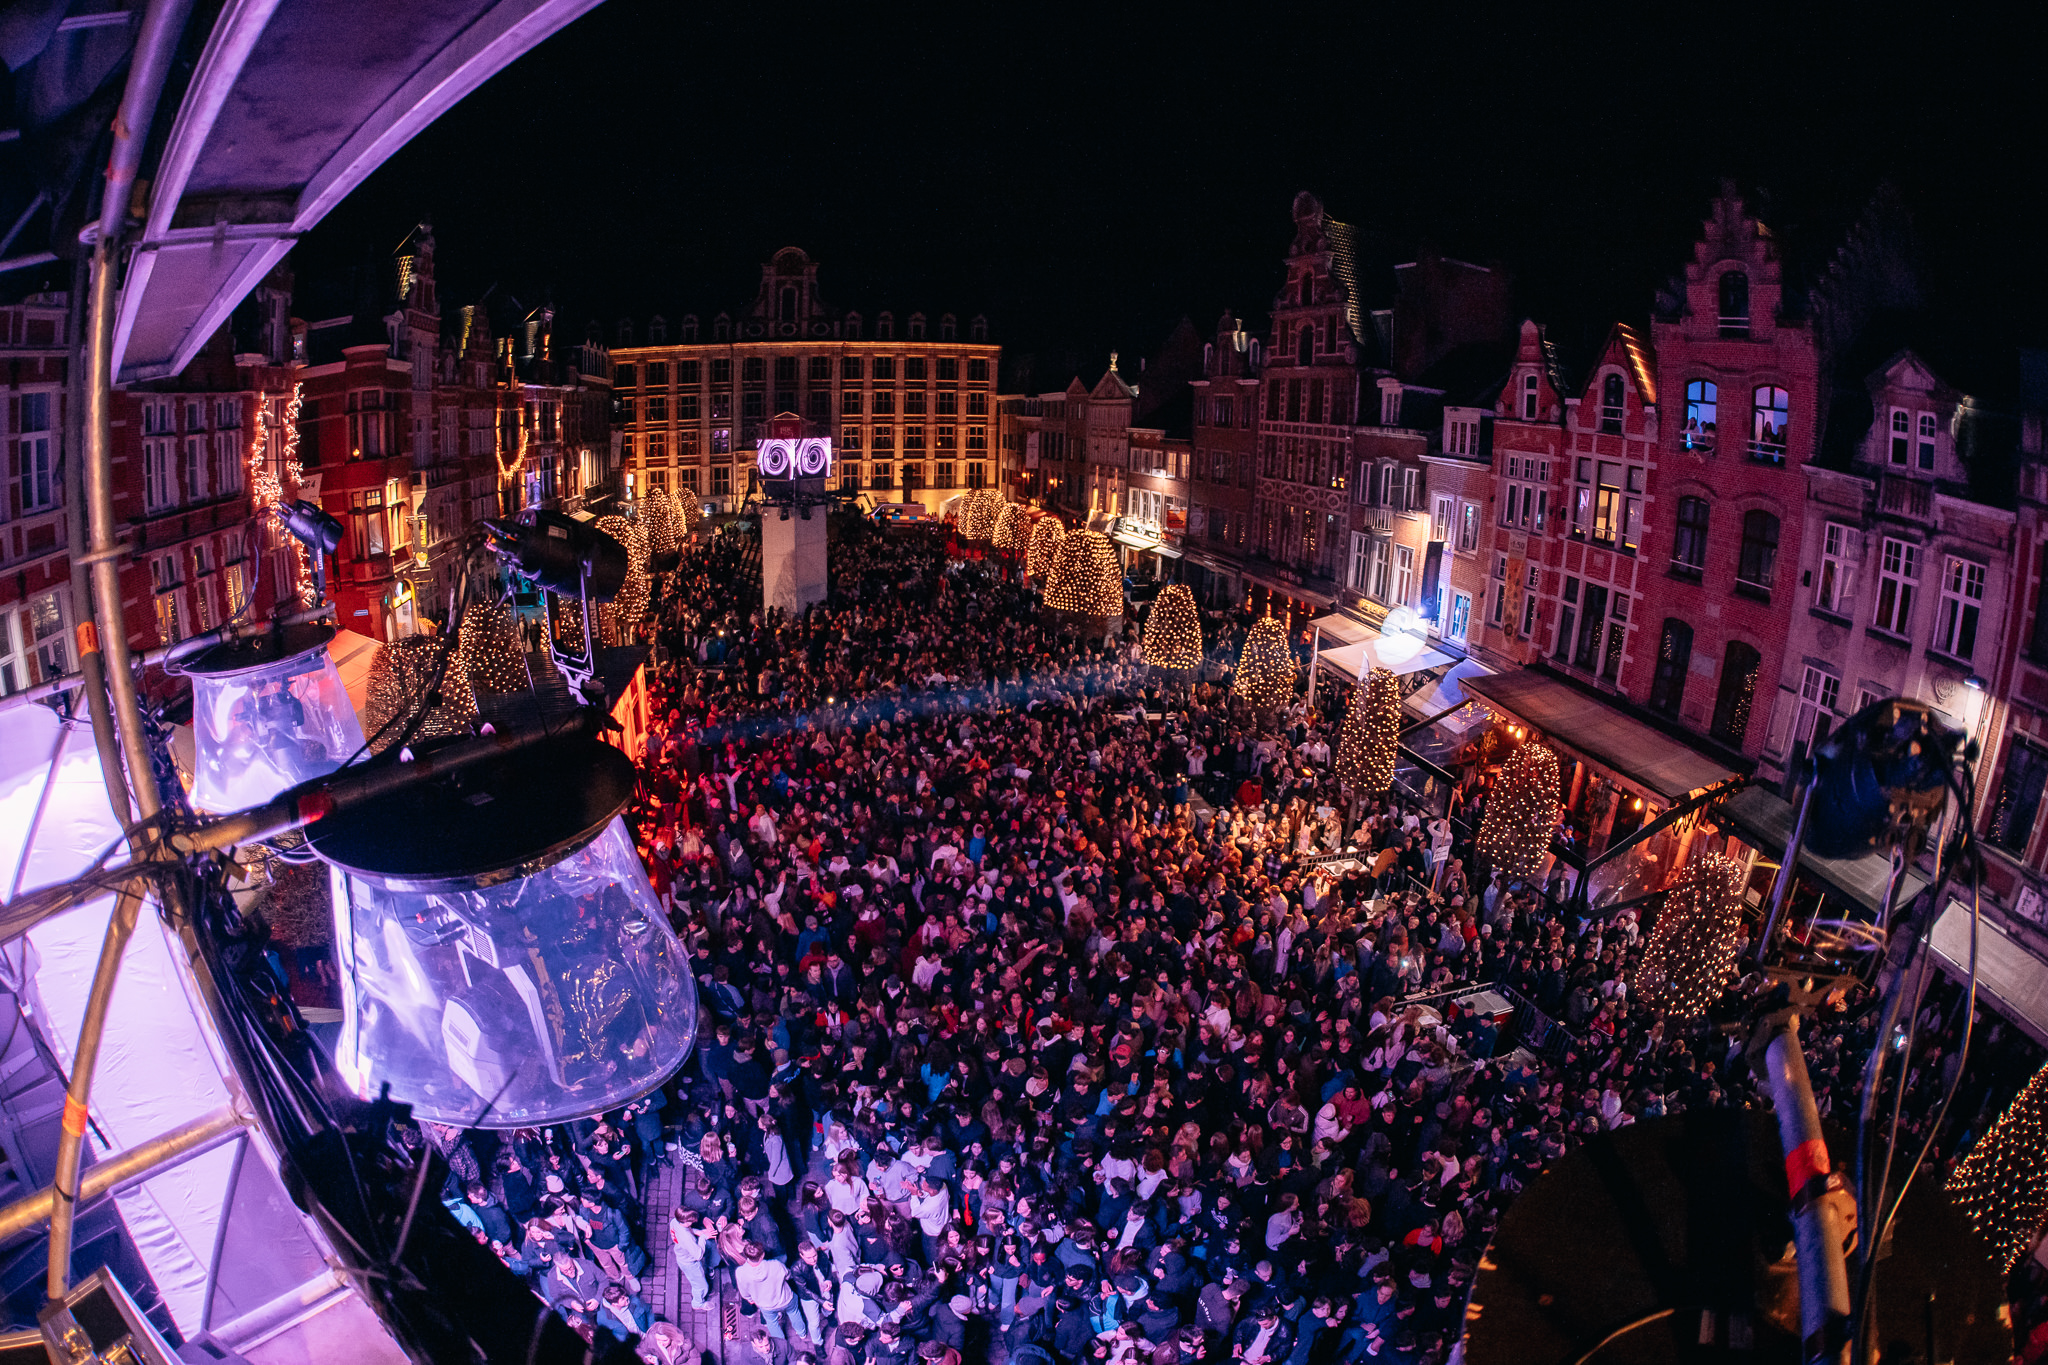 NEXO STM powers an outdoor Belgian mega-club for 10,000 people